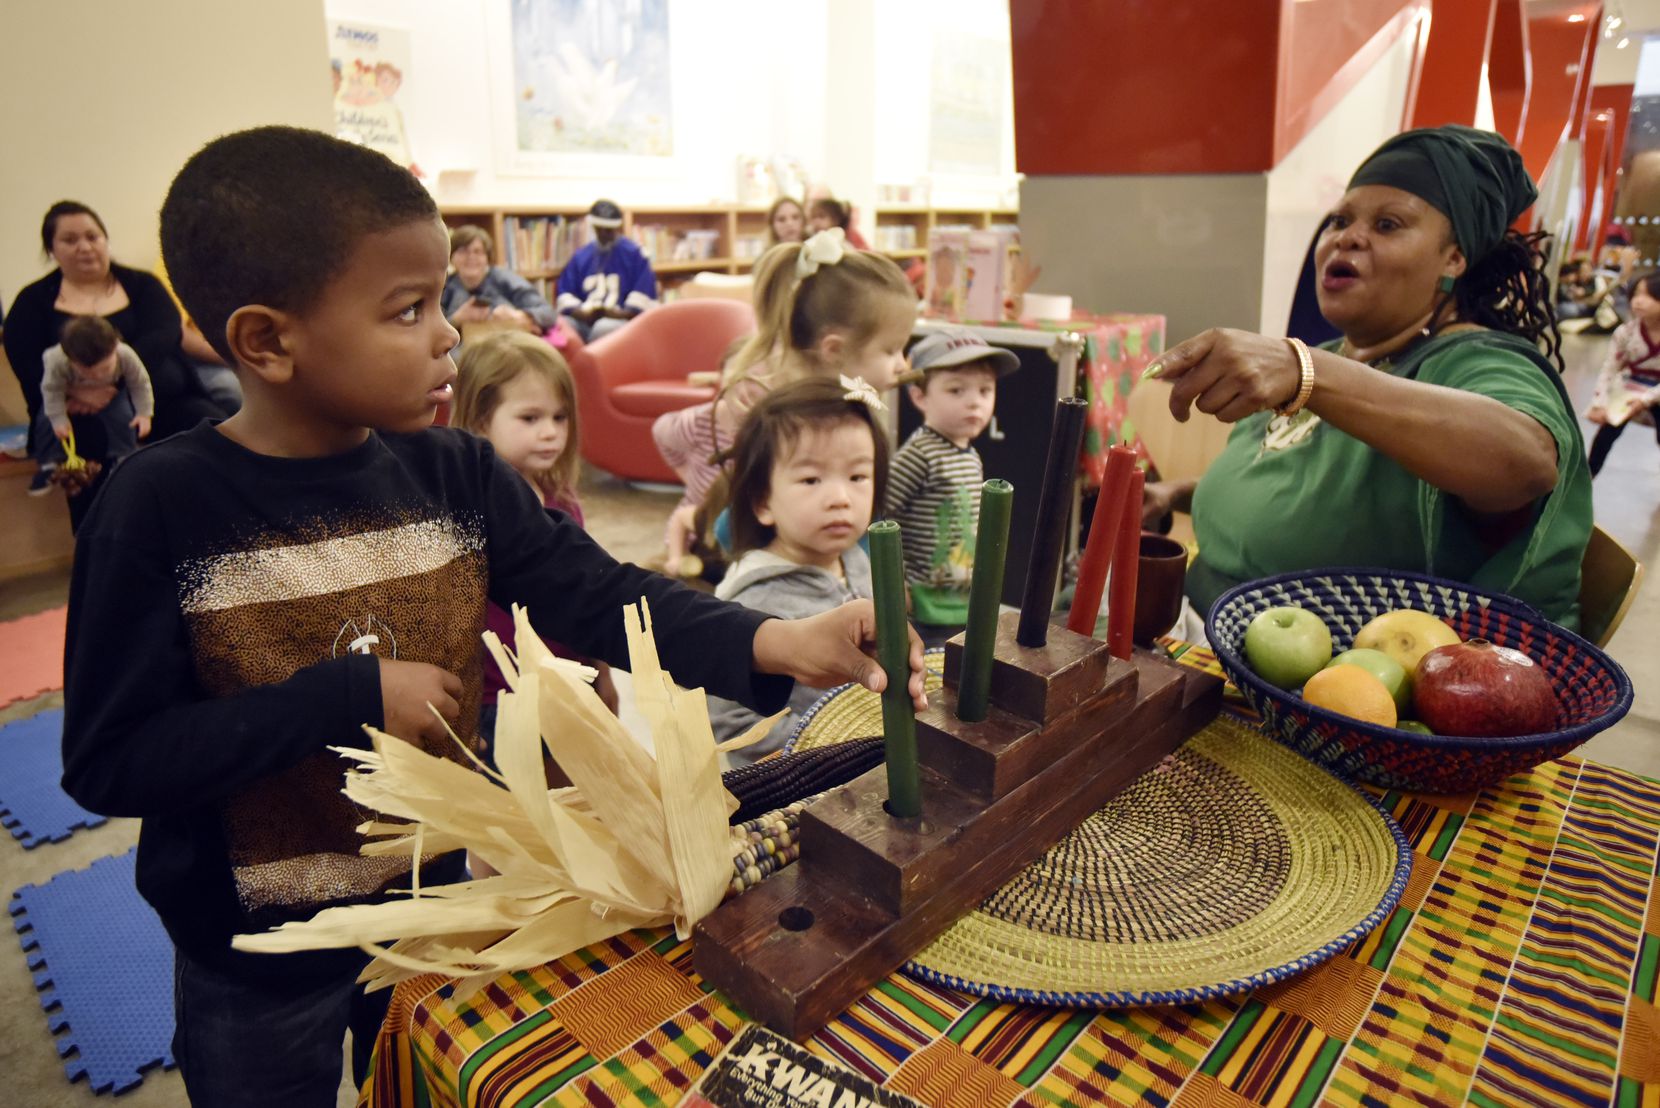 Afiah Bey (far right), a griot who was a staple at Kwanzaa celebrations, will be honored at...